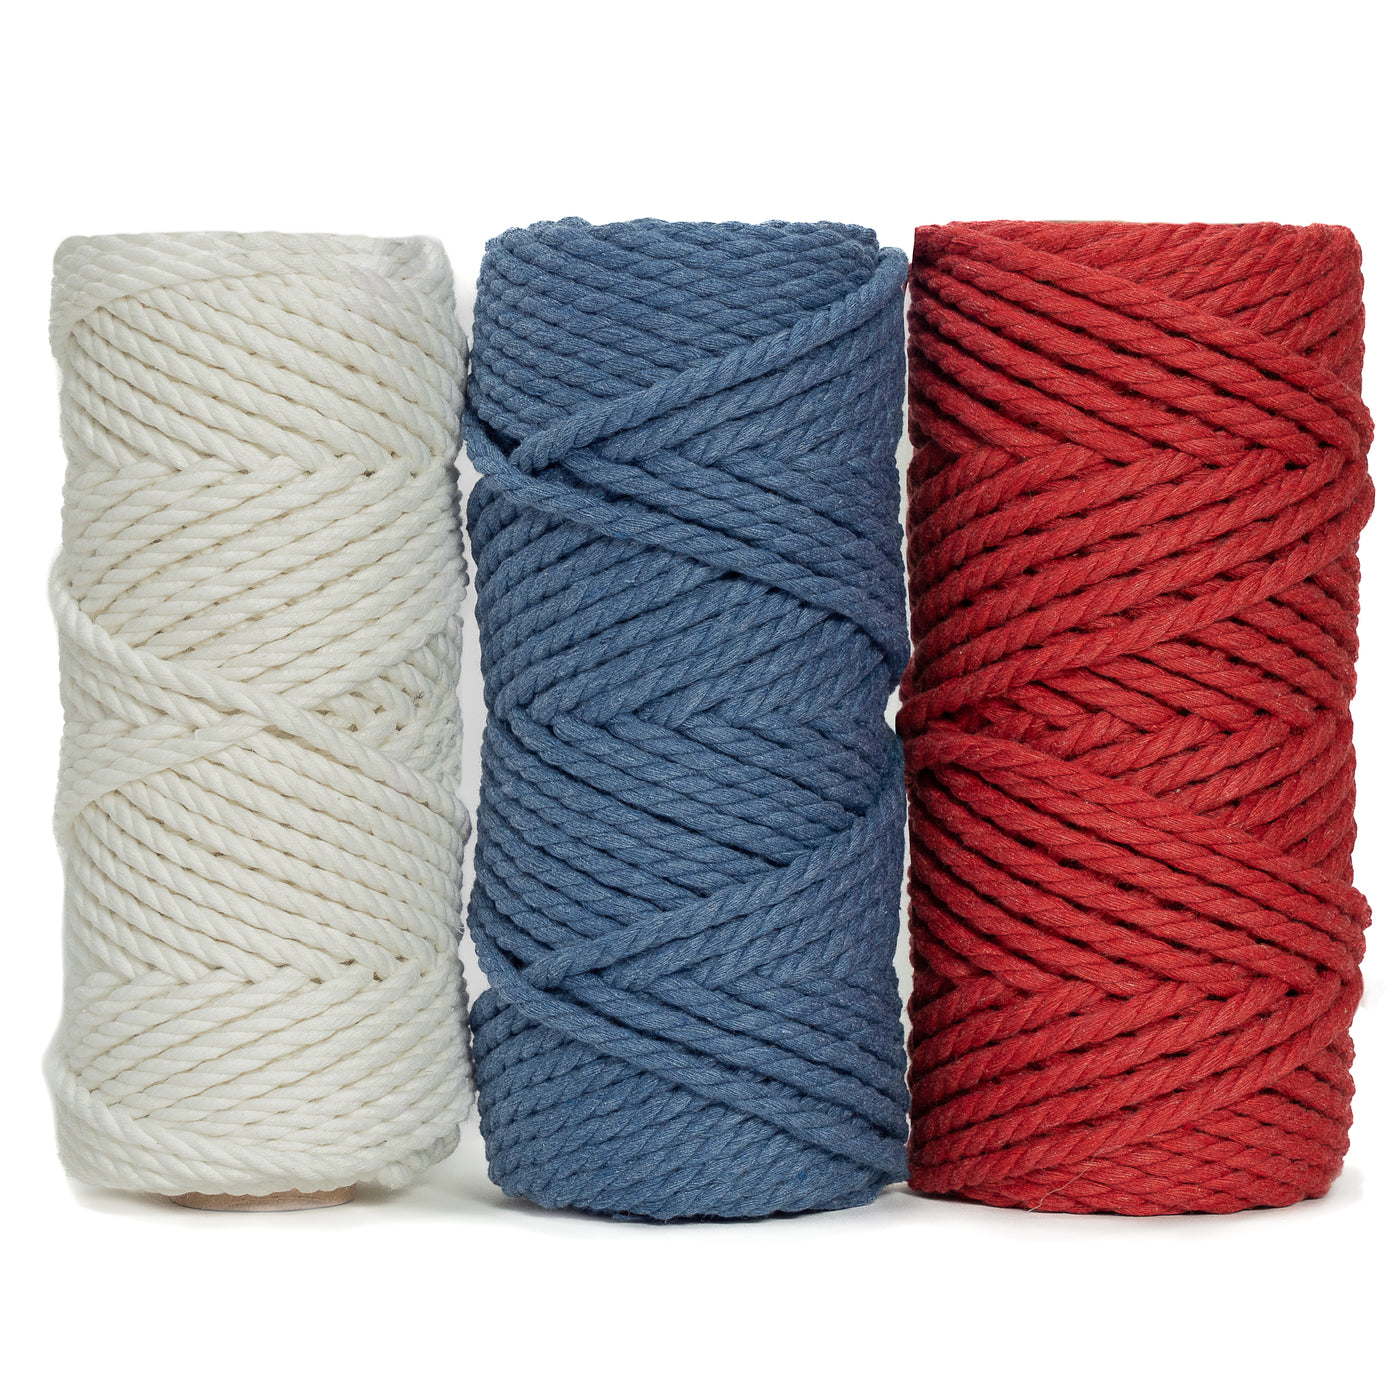 4th of July Bundle - Cotton Rope Zero Waste 5mm - 3ply